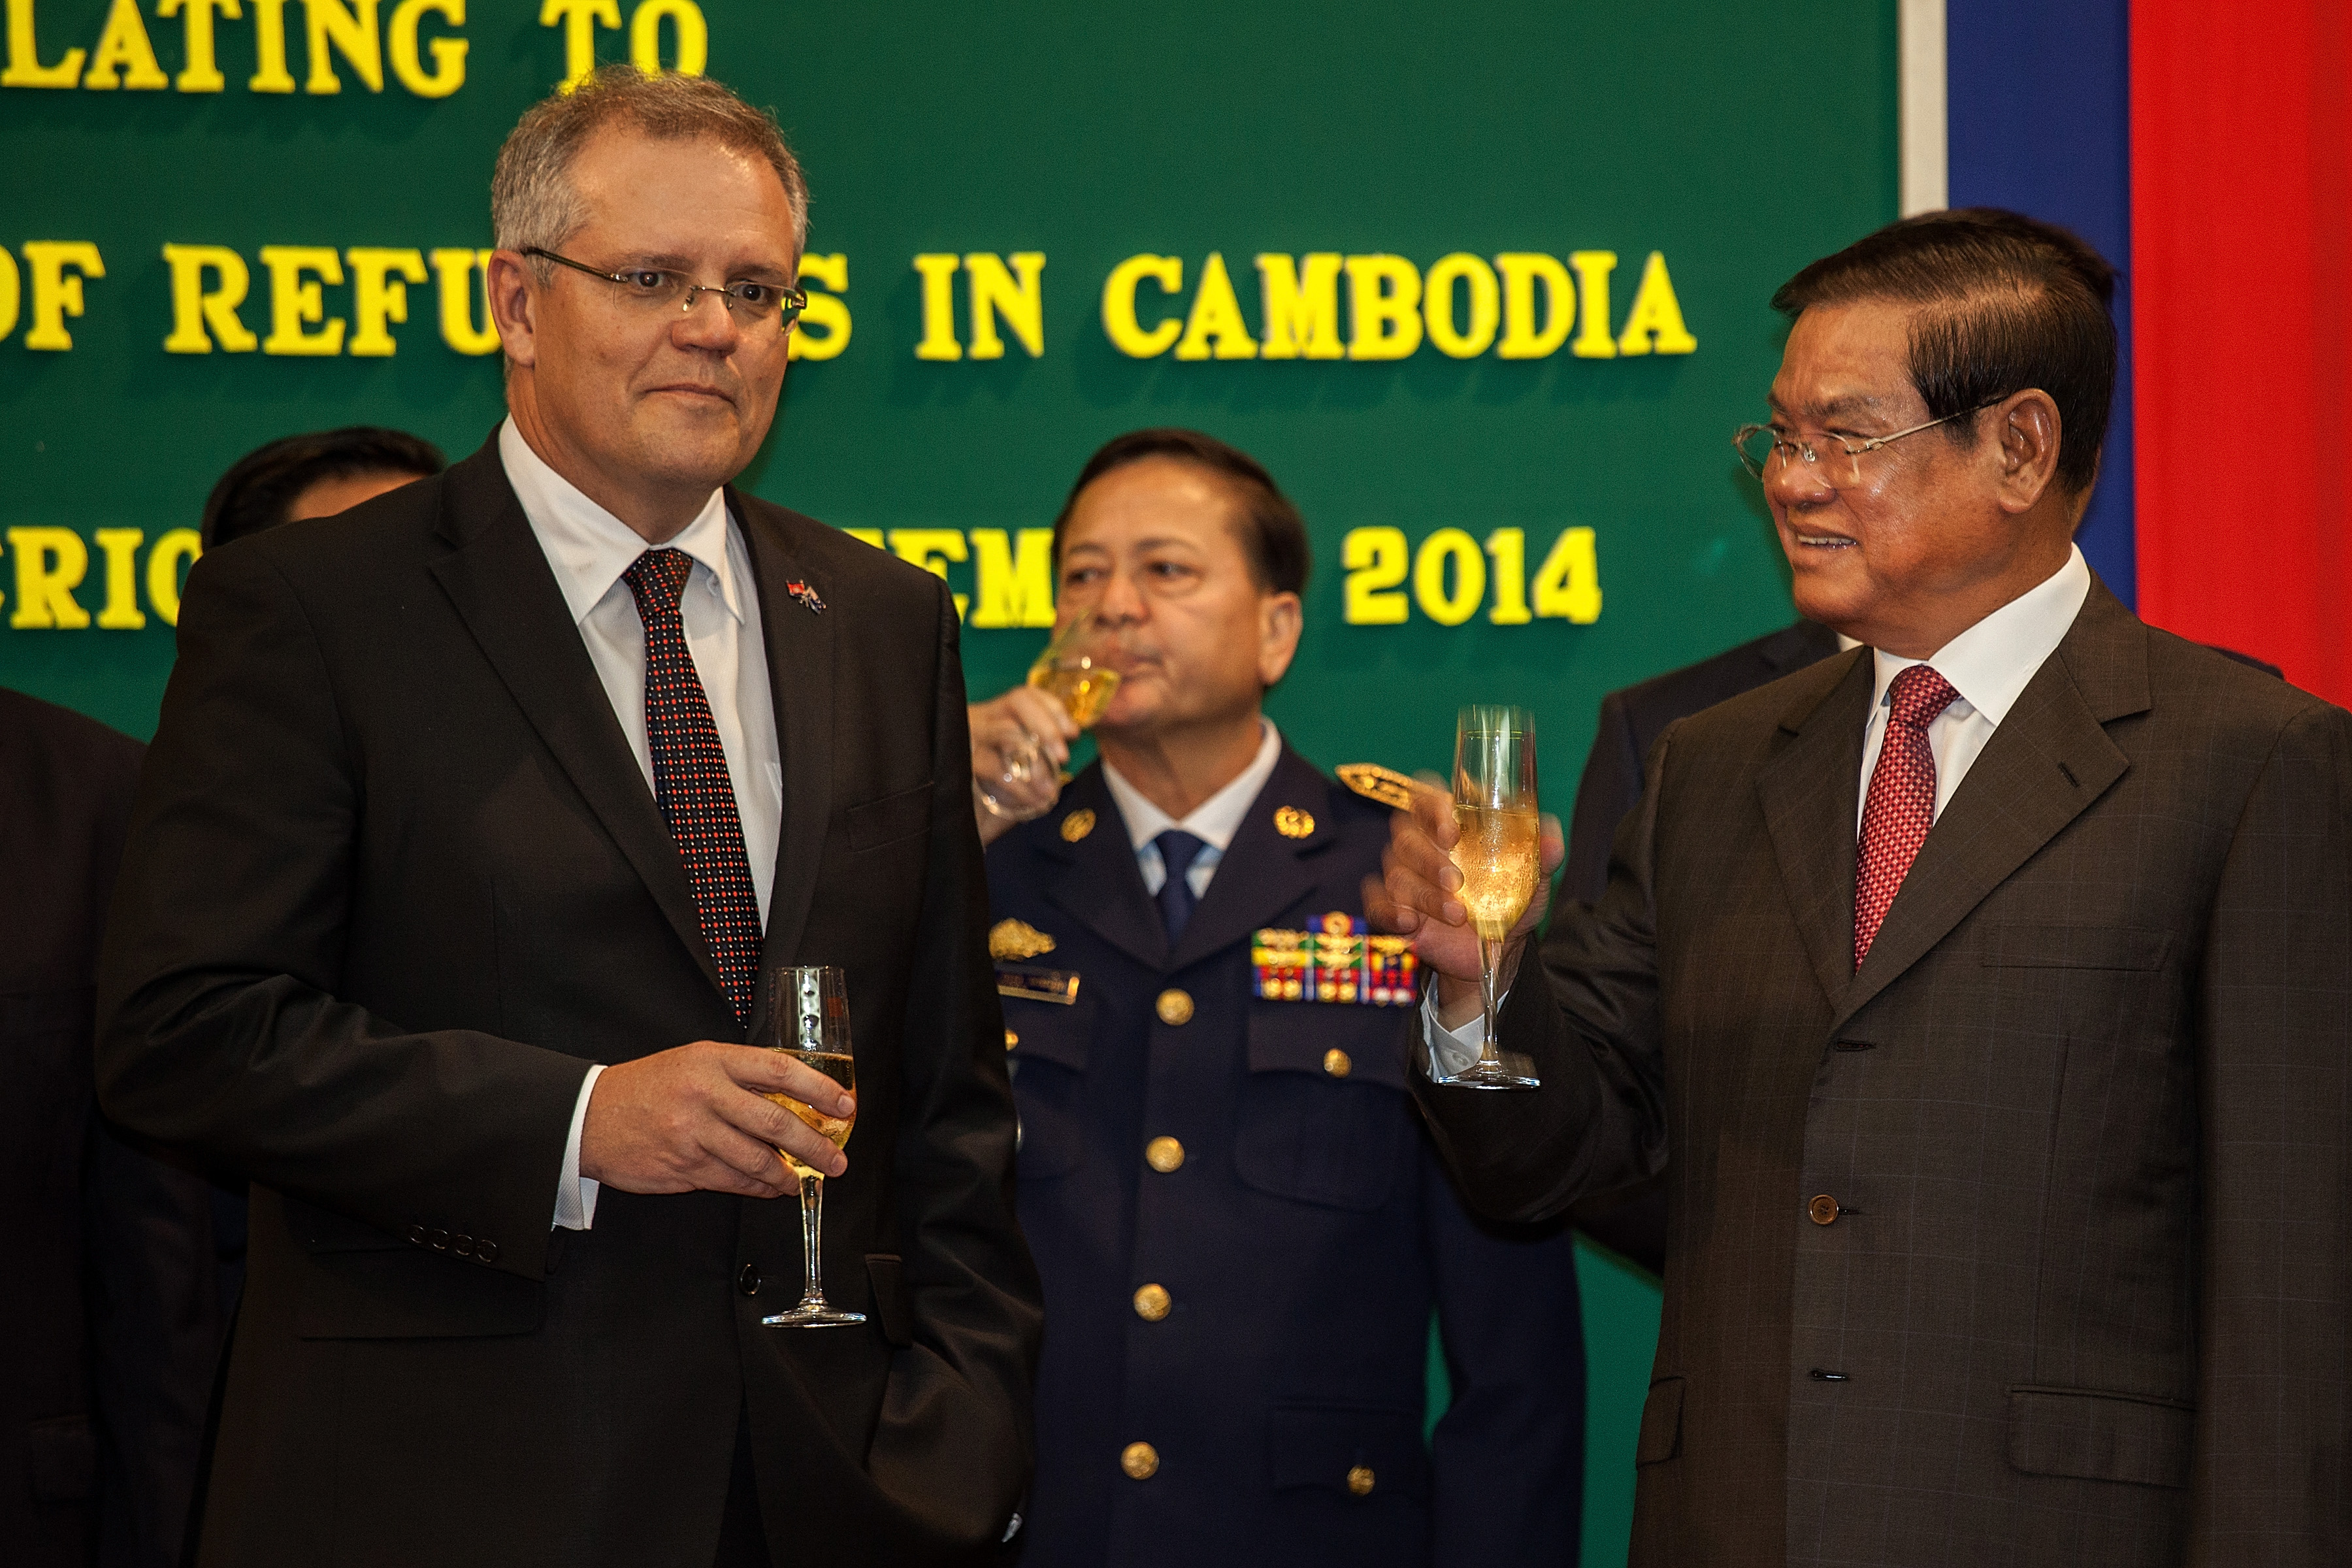 Australian Immigration Minister Scott Morrison and Cambodian Interior Minister Sar Kheng hold a flute of champagne after signing a deal to resettle refugees from Australia to Cambodia at the Ministry of Interior on September 26, 2014 in Phnom Penh, Cambodia. (Omar Havana—Getty Images)